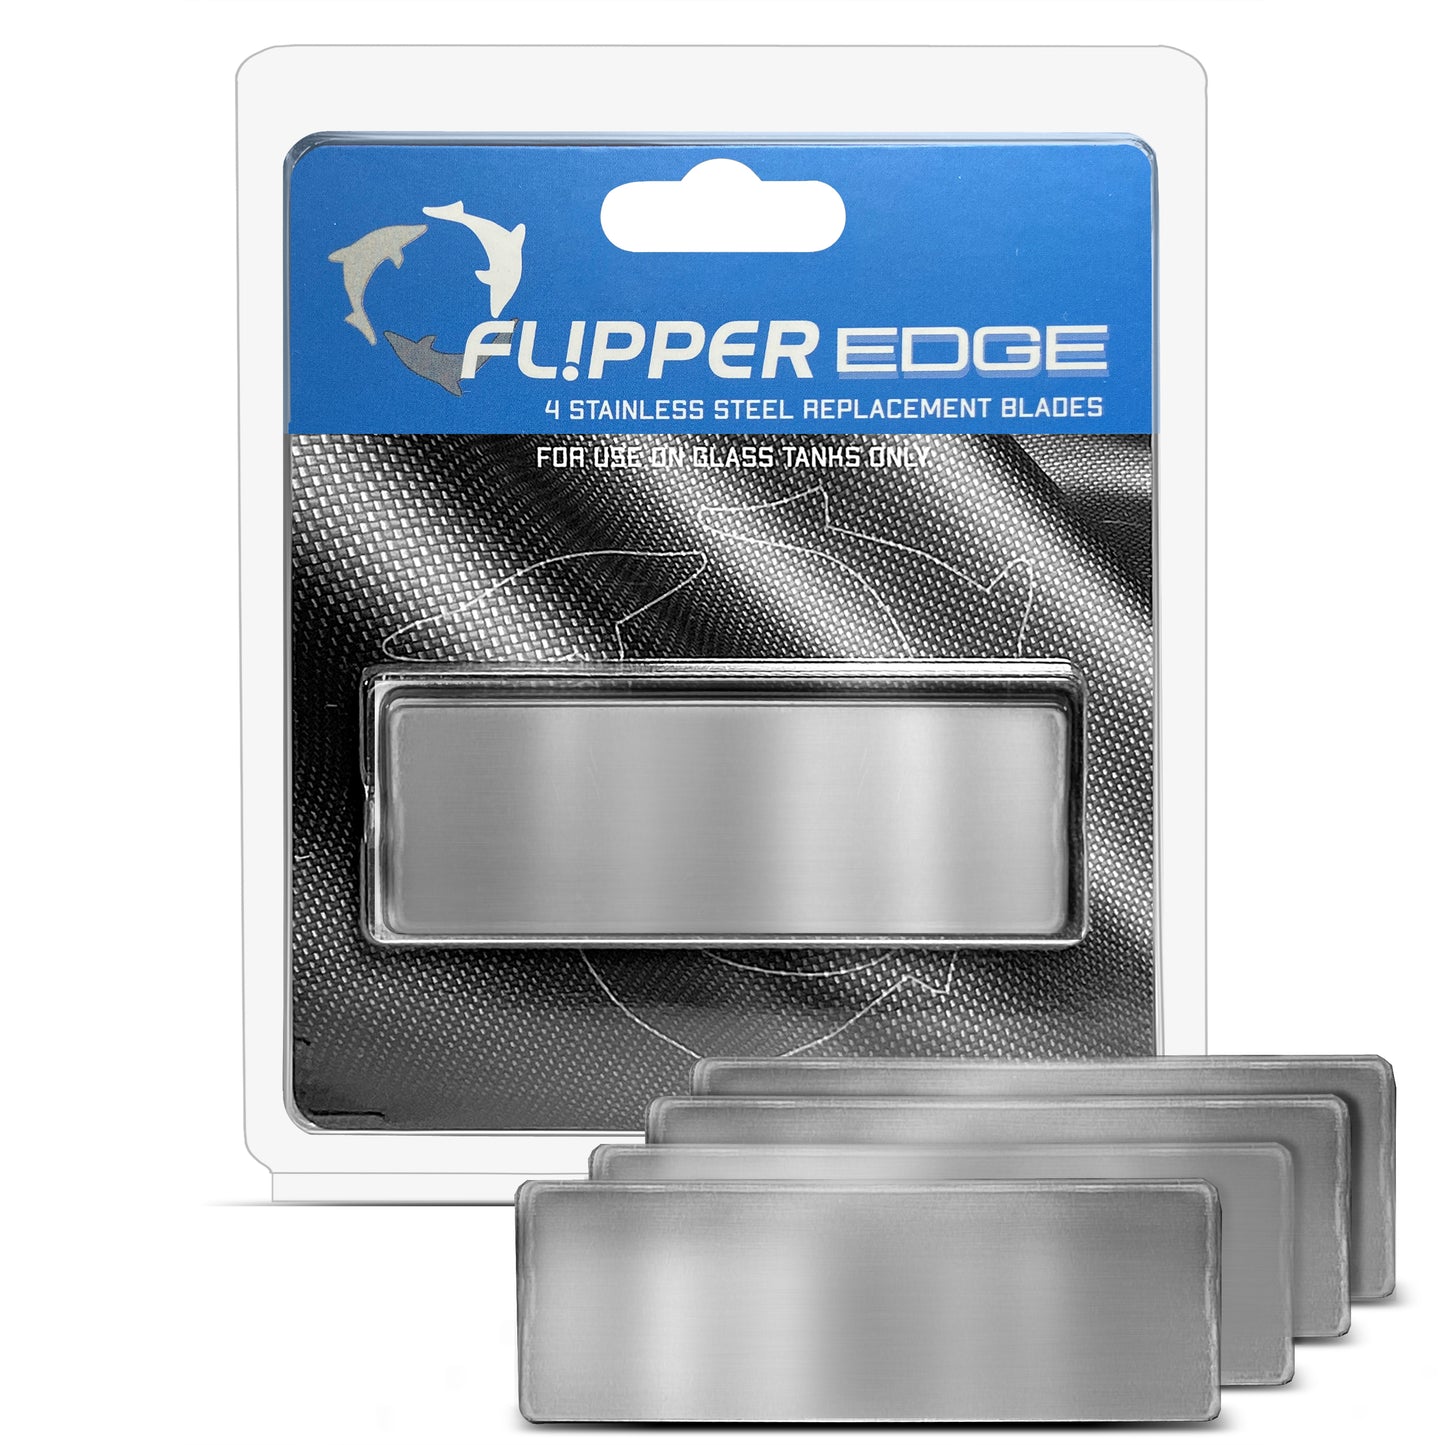 Edge Stainless Steel Blades - 4pk- MAP $17.99